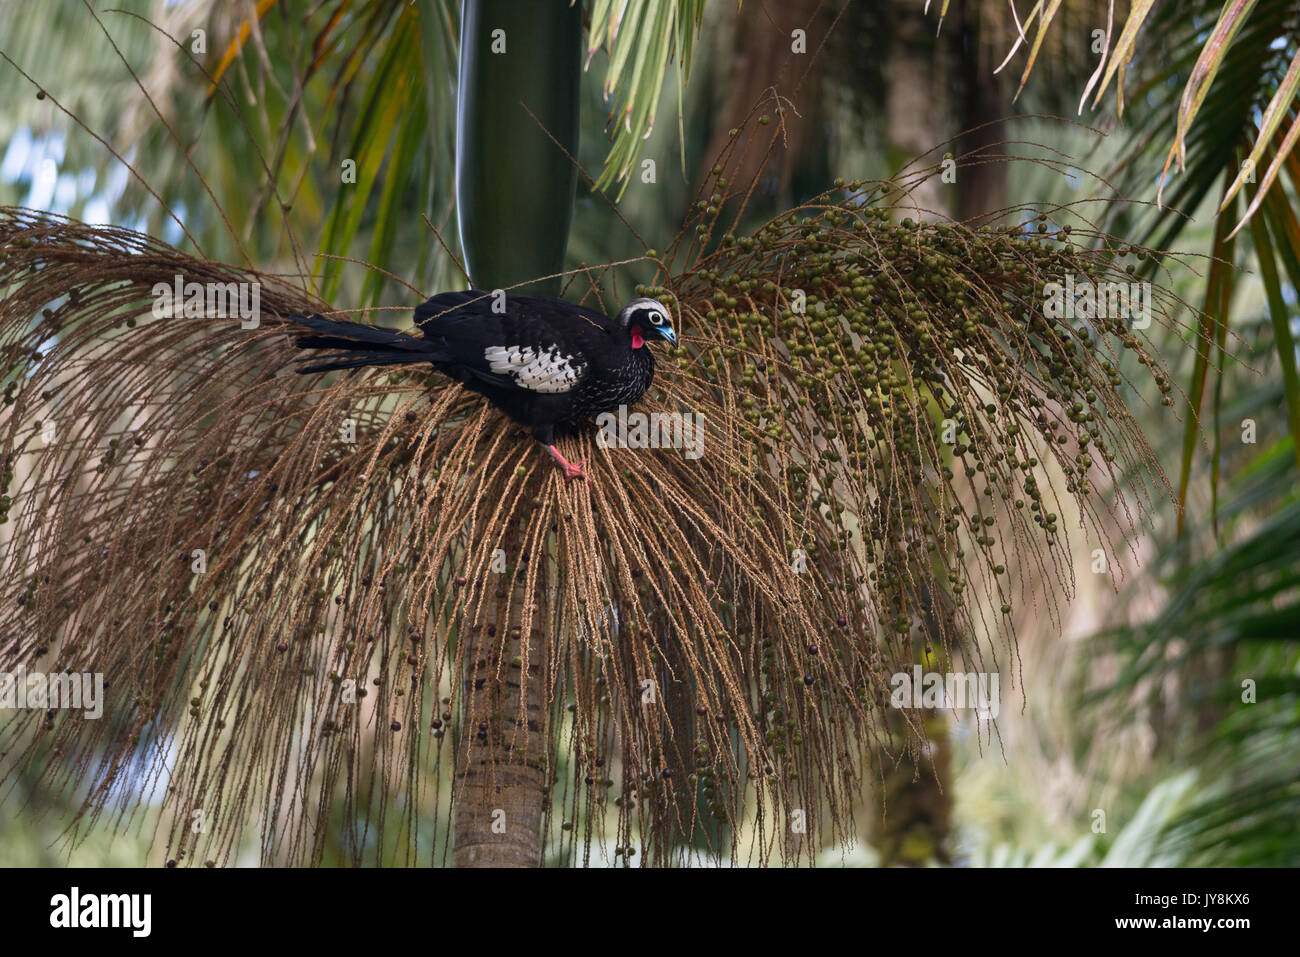 Black-fronted Piping Guan eating on Palmito tree Stock Photo